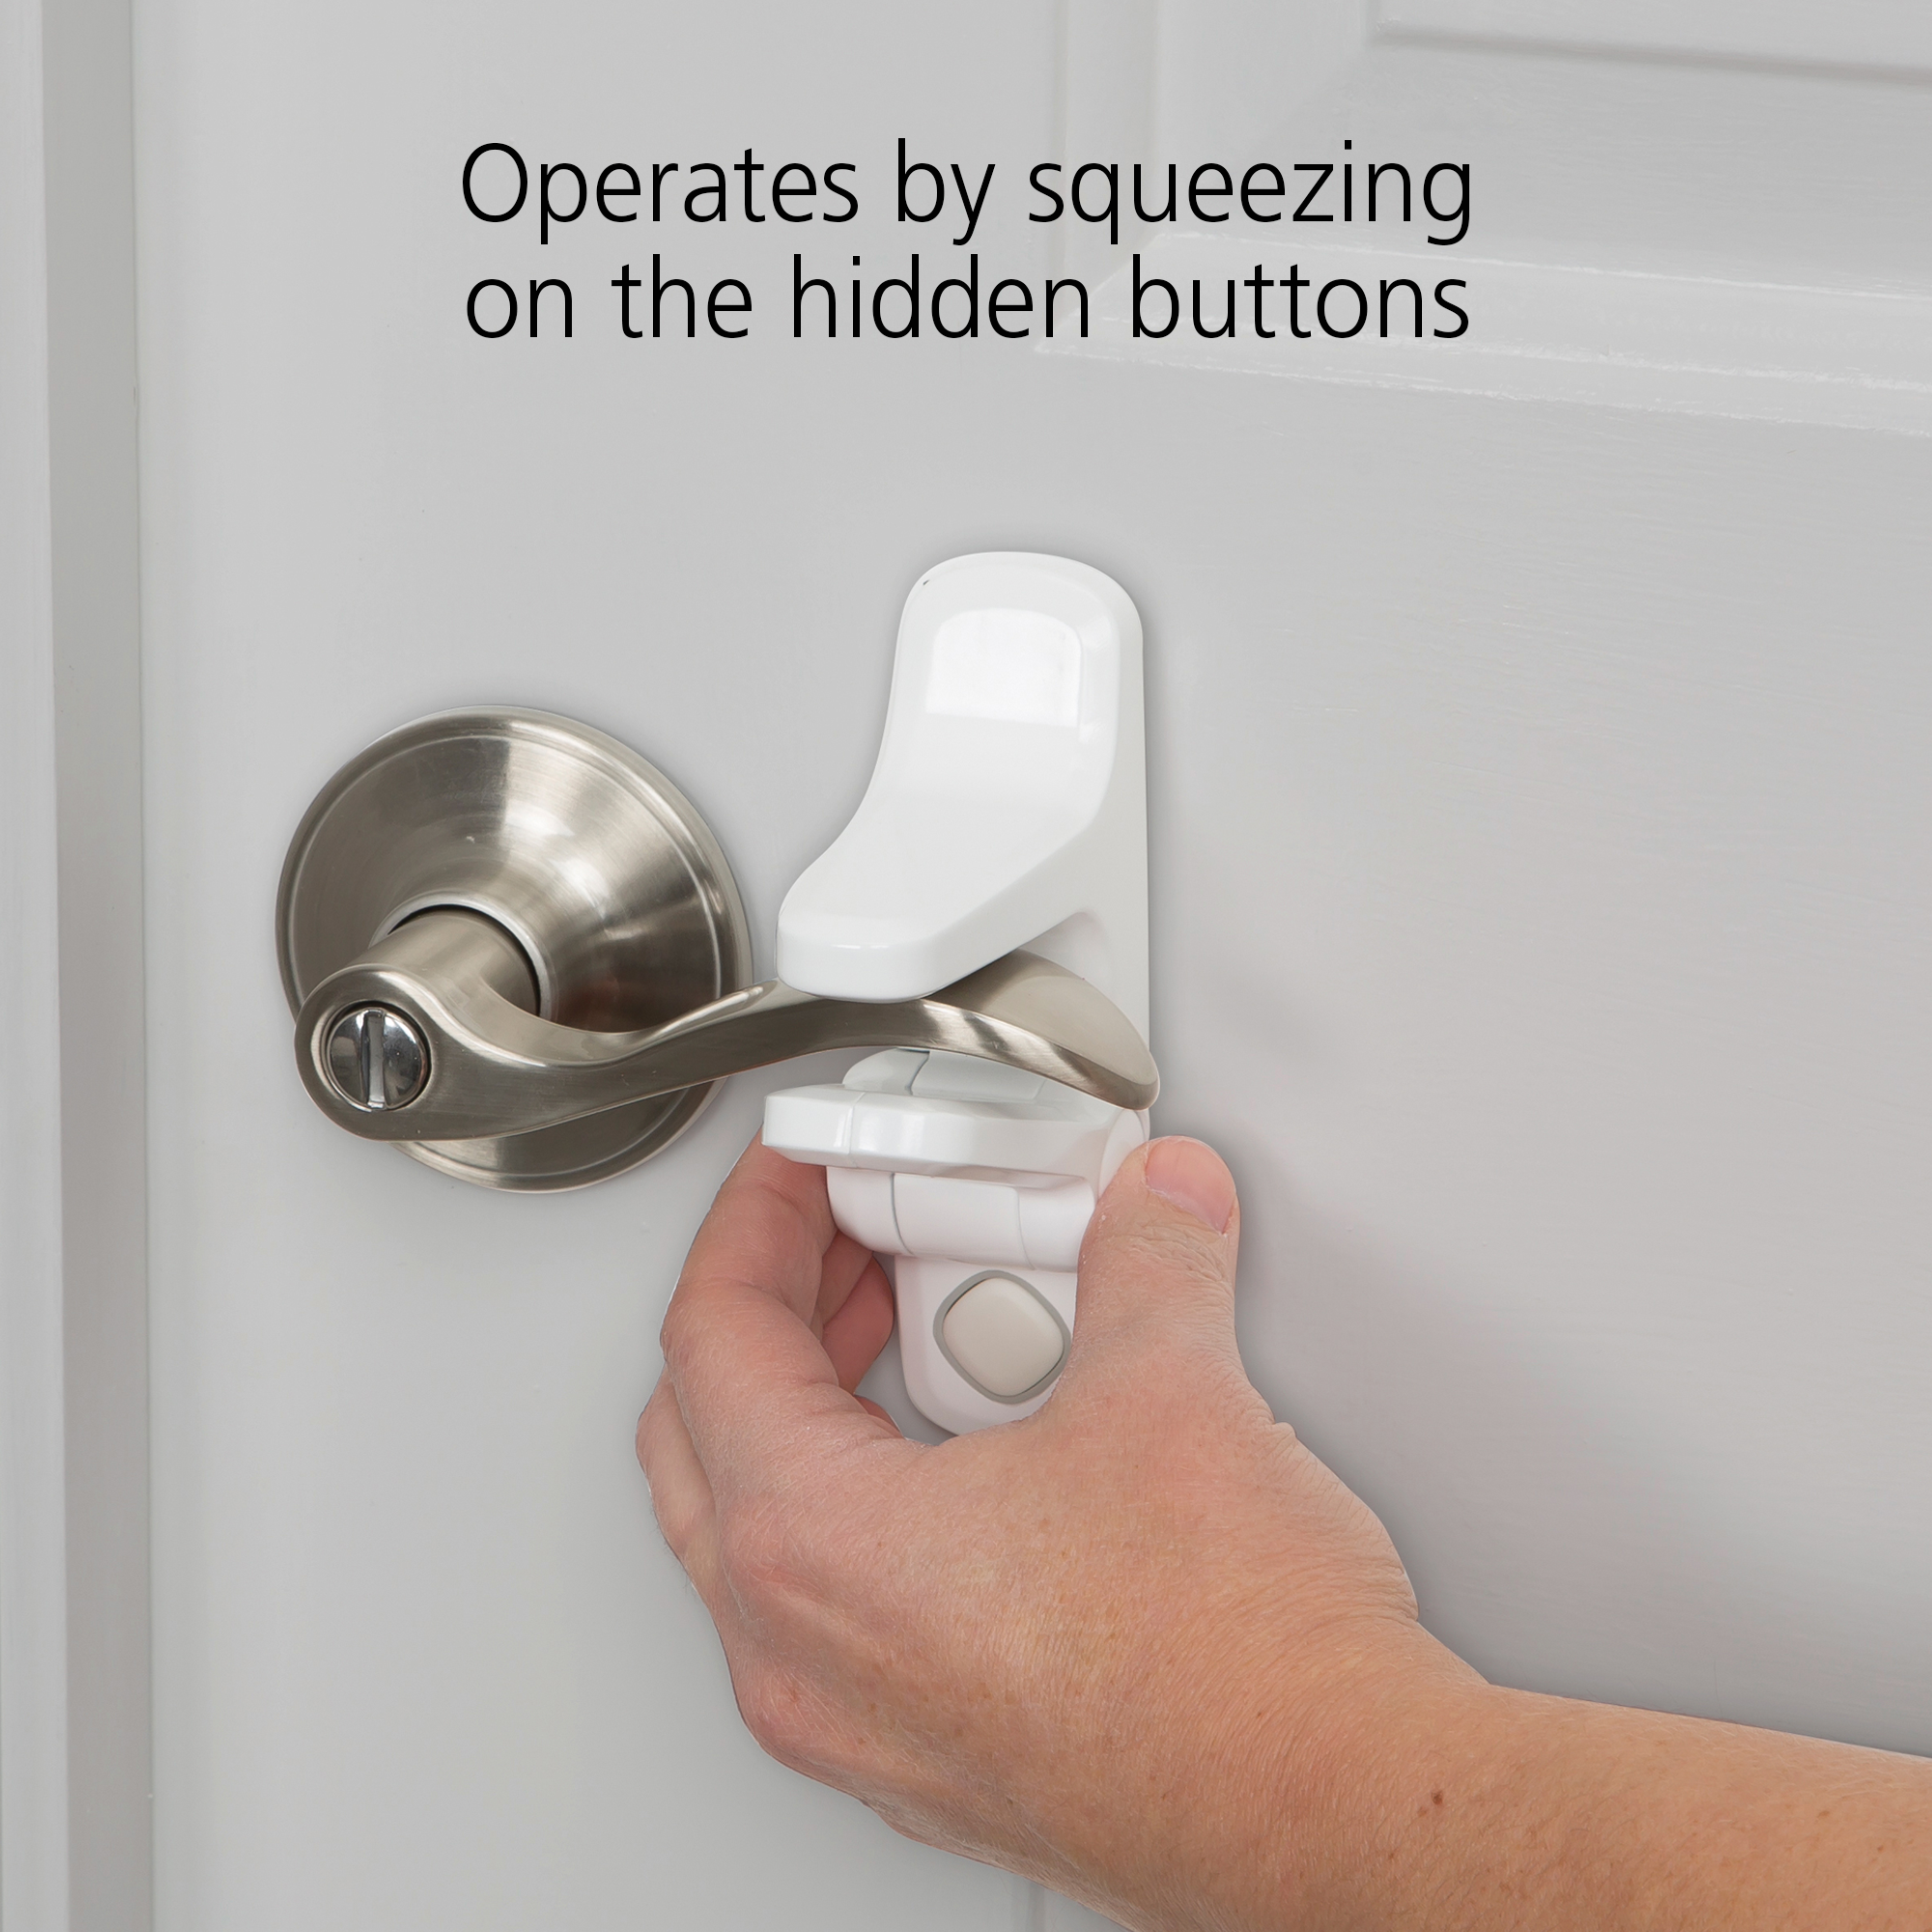 Operates by squeezing on the hidden buttons